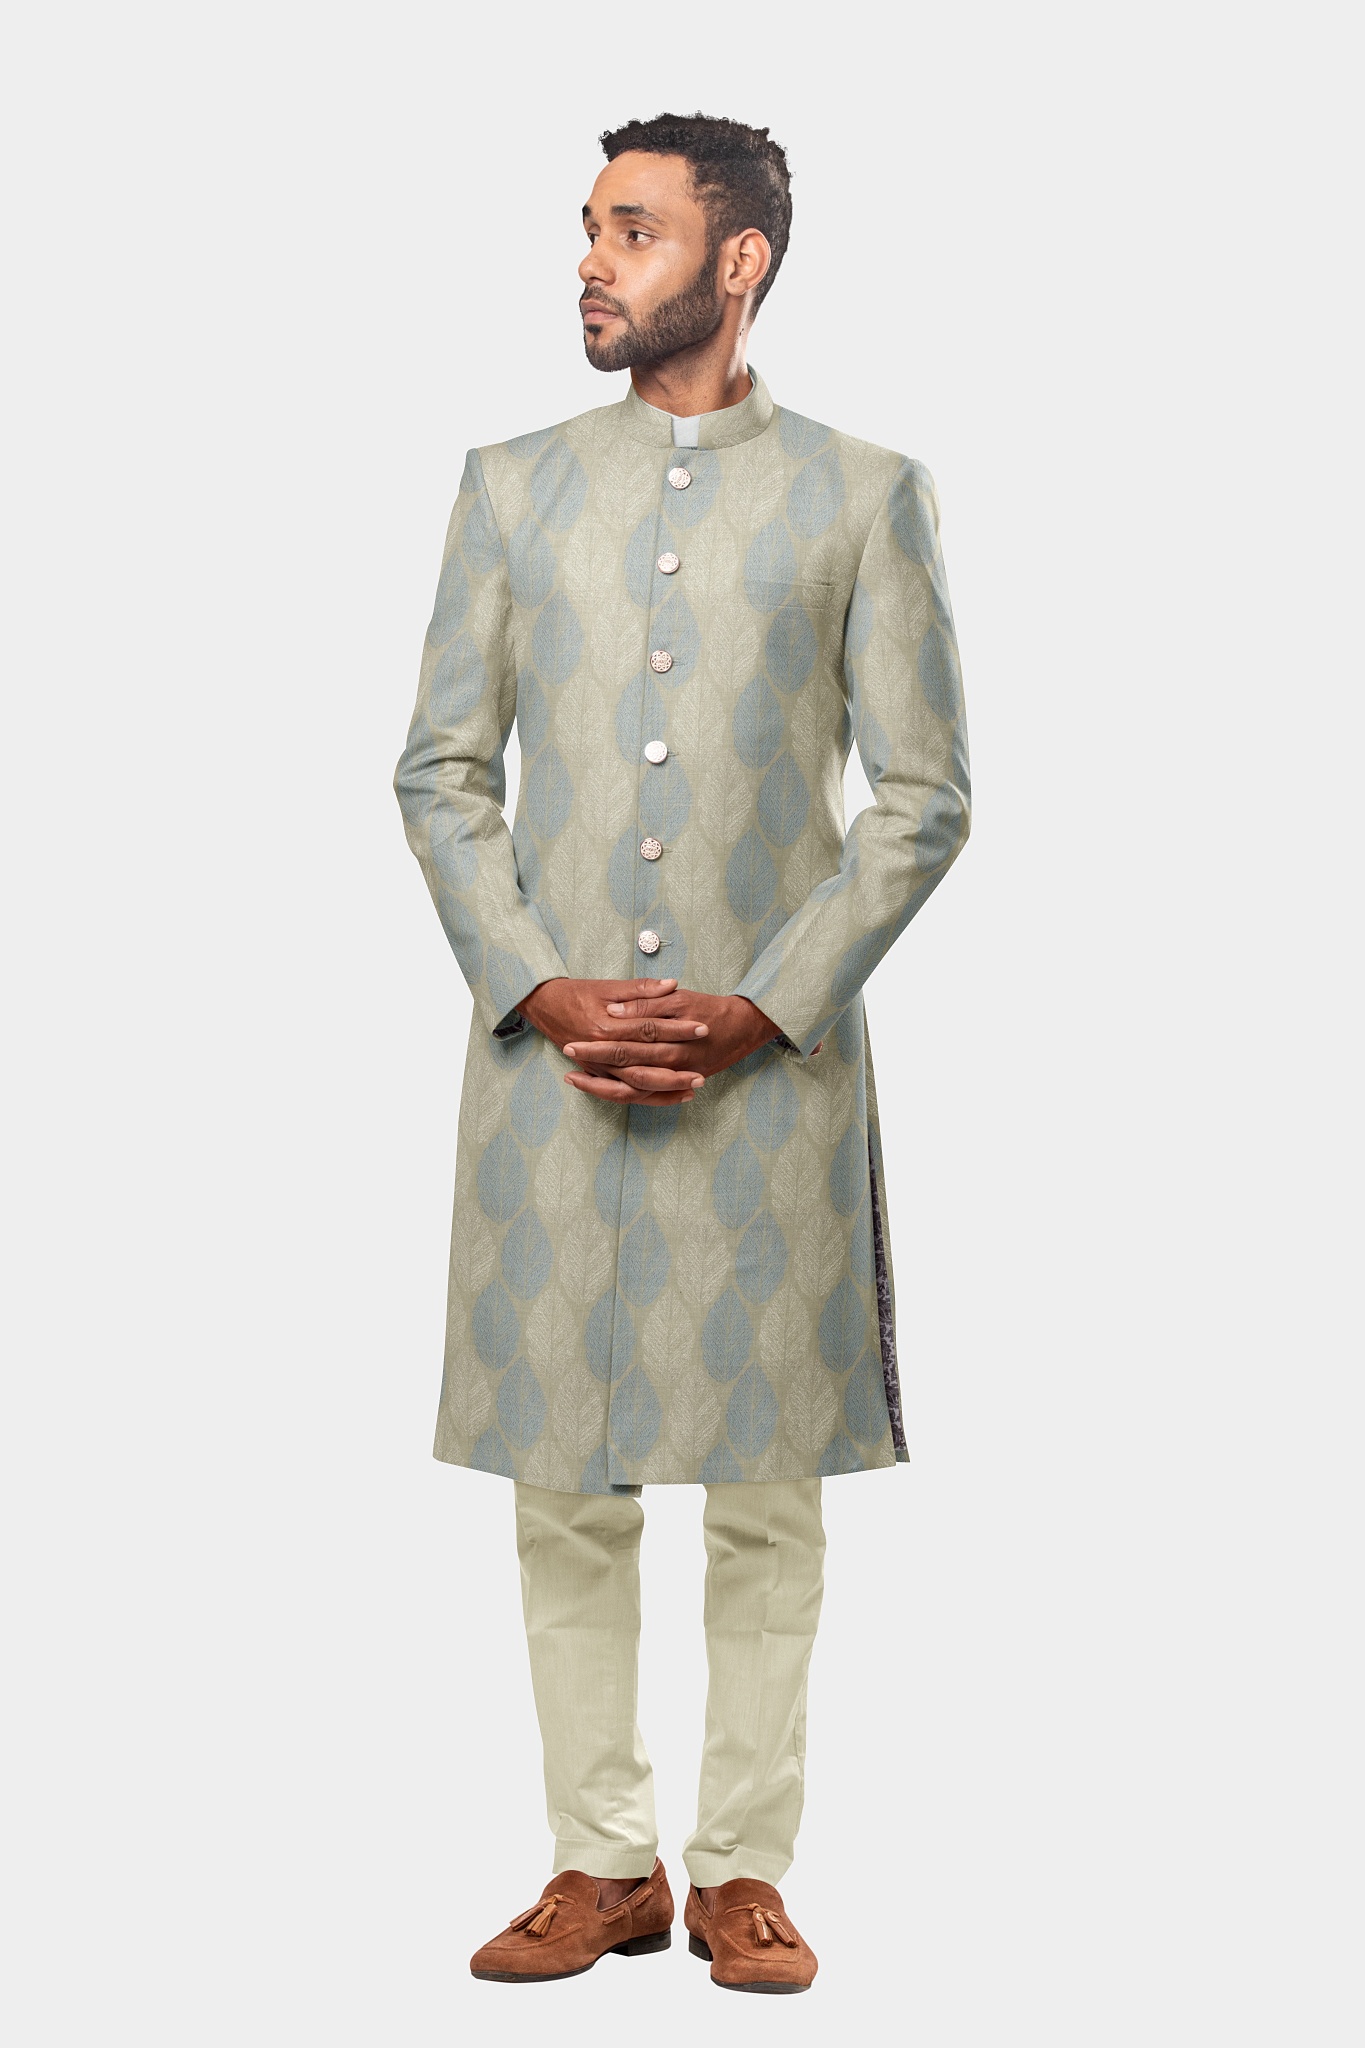 Creamy Sky with Blue and Gold Leaf Accents Sherwani 29JK